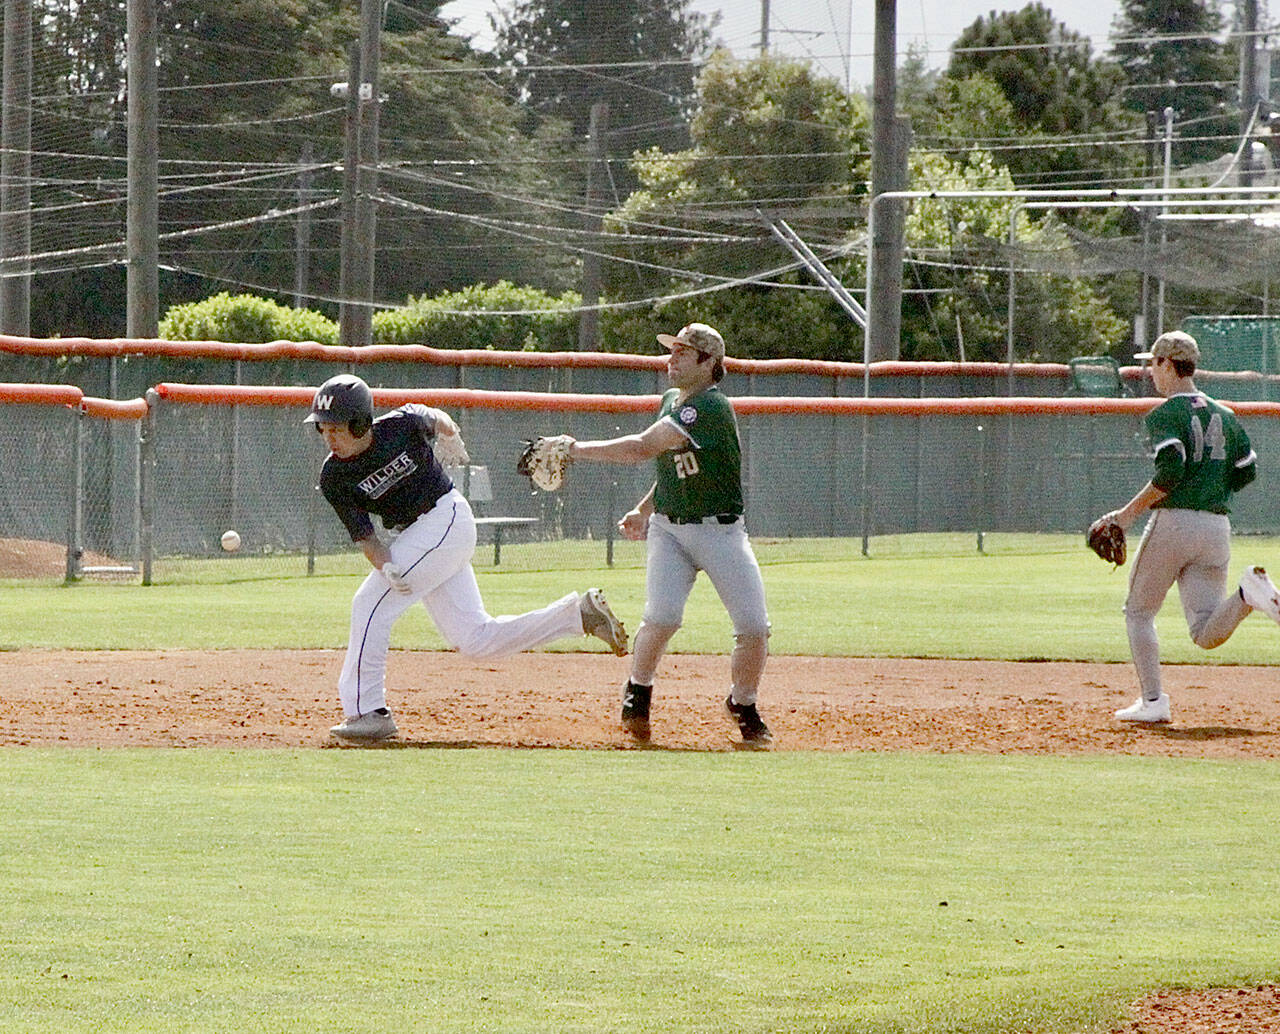 Kaleb Mullen of the Wilder Jr baseball team is in a pickle between 2nd and 3rd. But an errant through by the Lakeside team made it possible for Mullen to reach 3rd base safely. #20 is Luca Migliore and #14 is Jacob Freer for Lakeside of Issaquah. dlogan